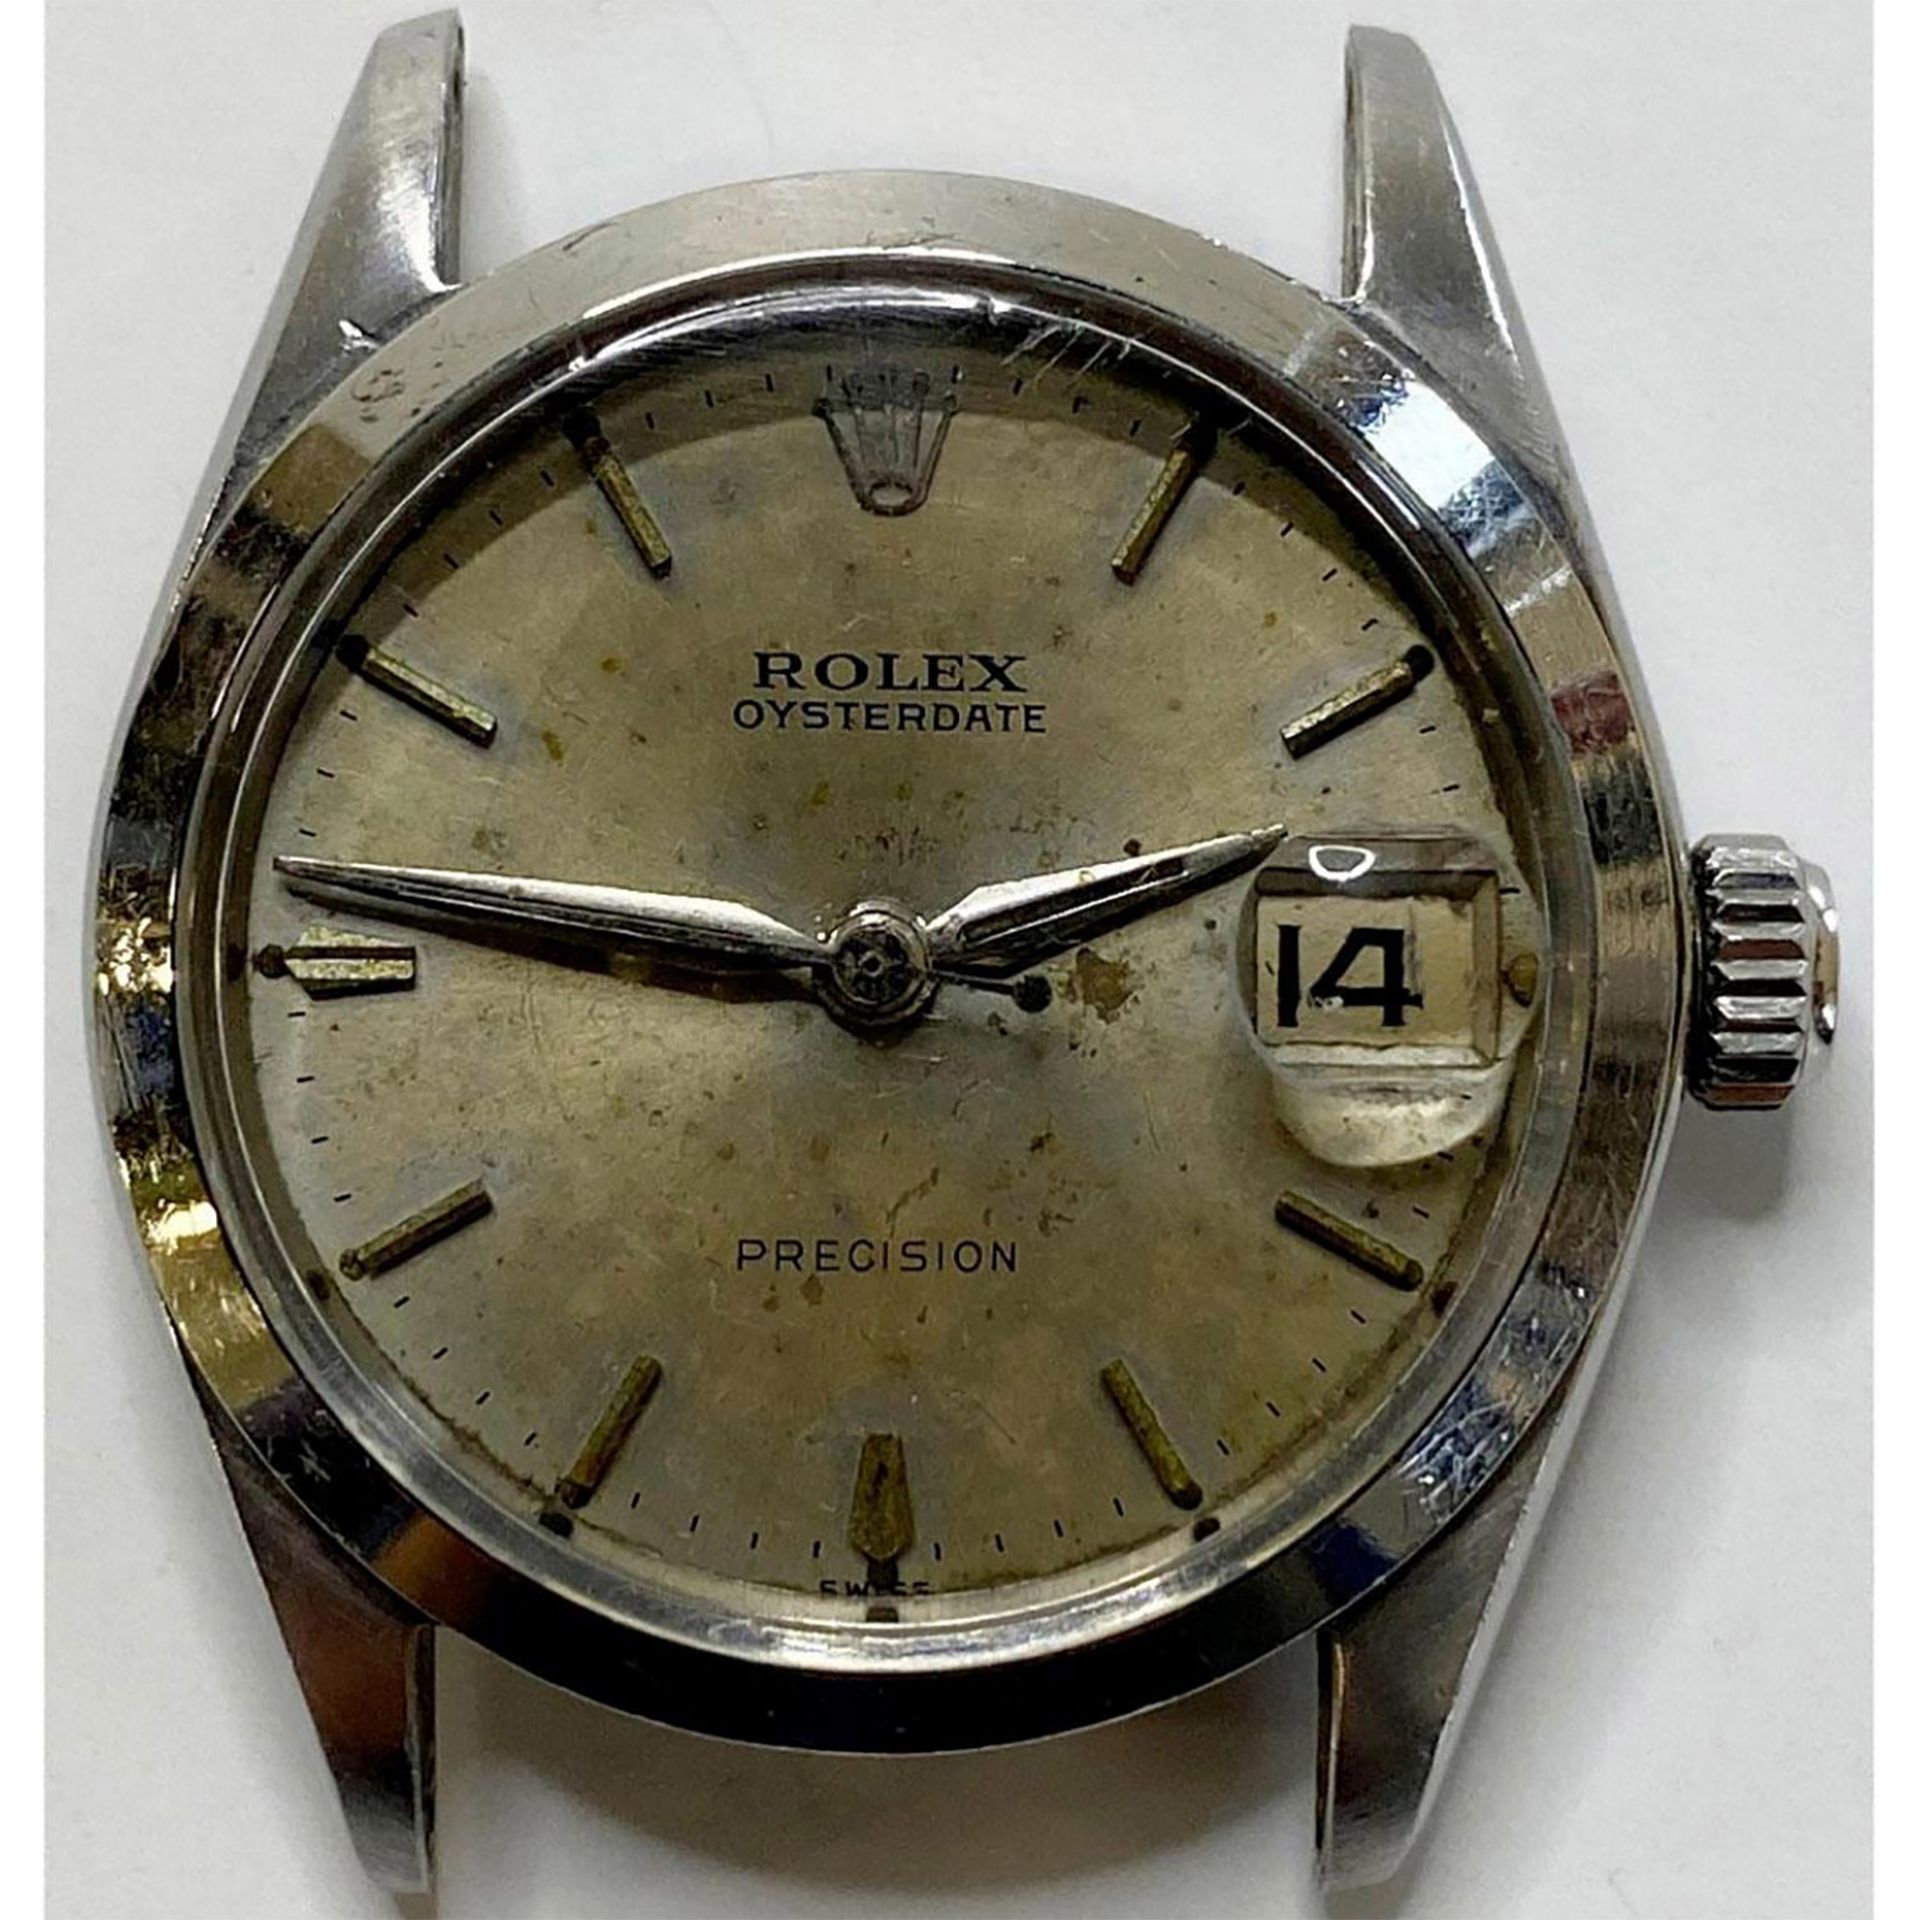 Vintage 1952 Rolex Oysterdate Precision Wind-Up Watch, 6466 - Image 13 of 18